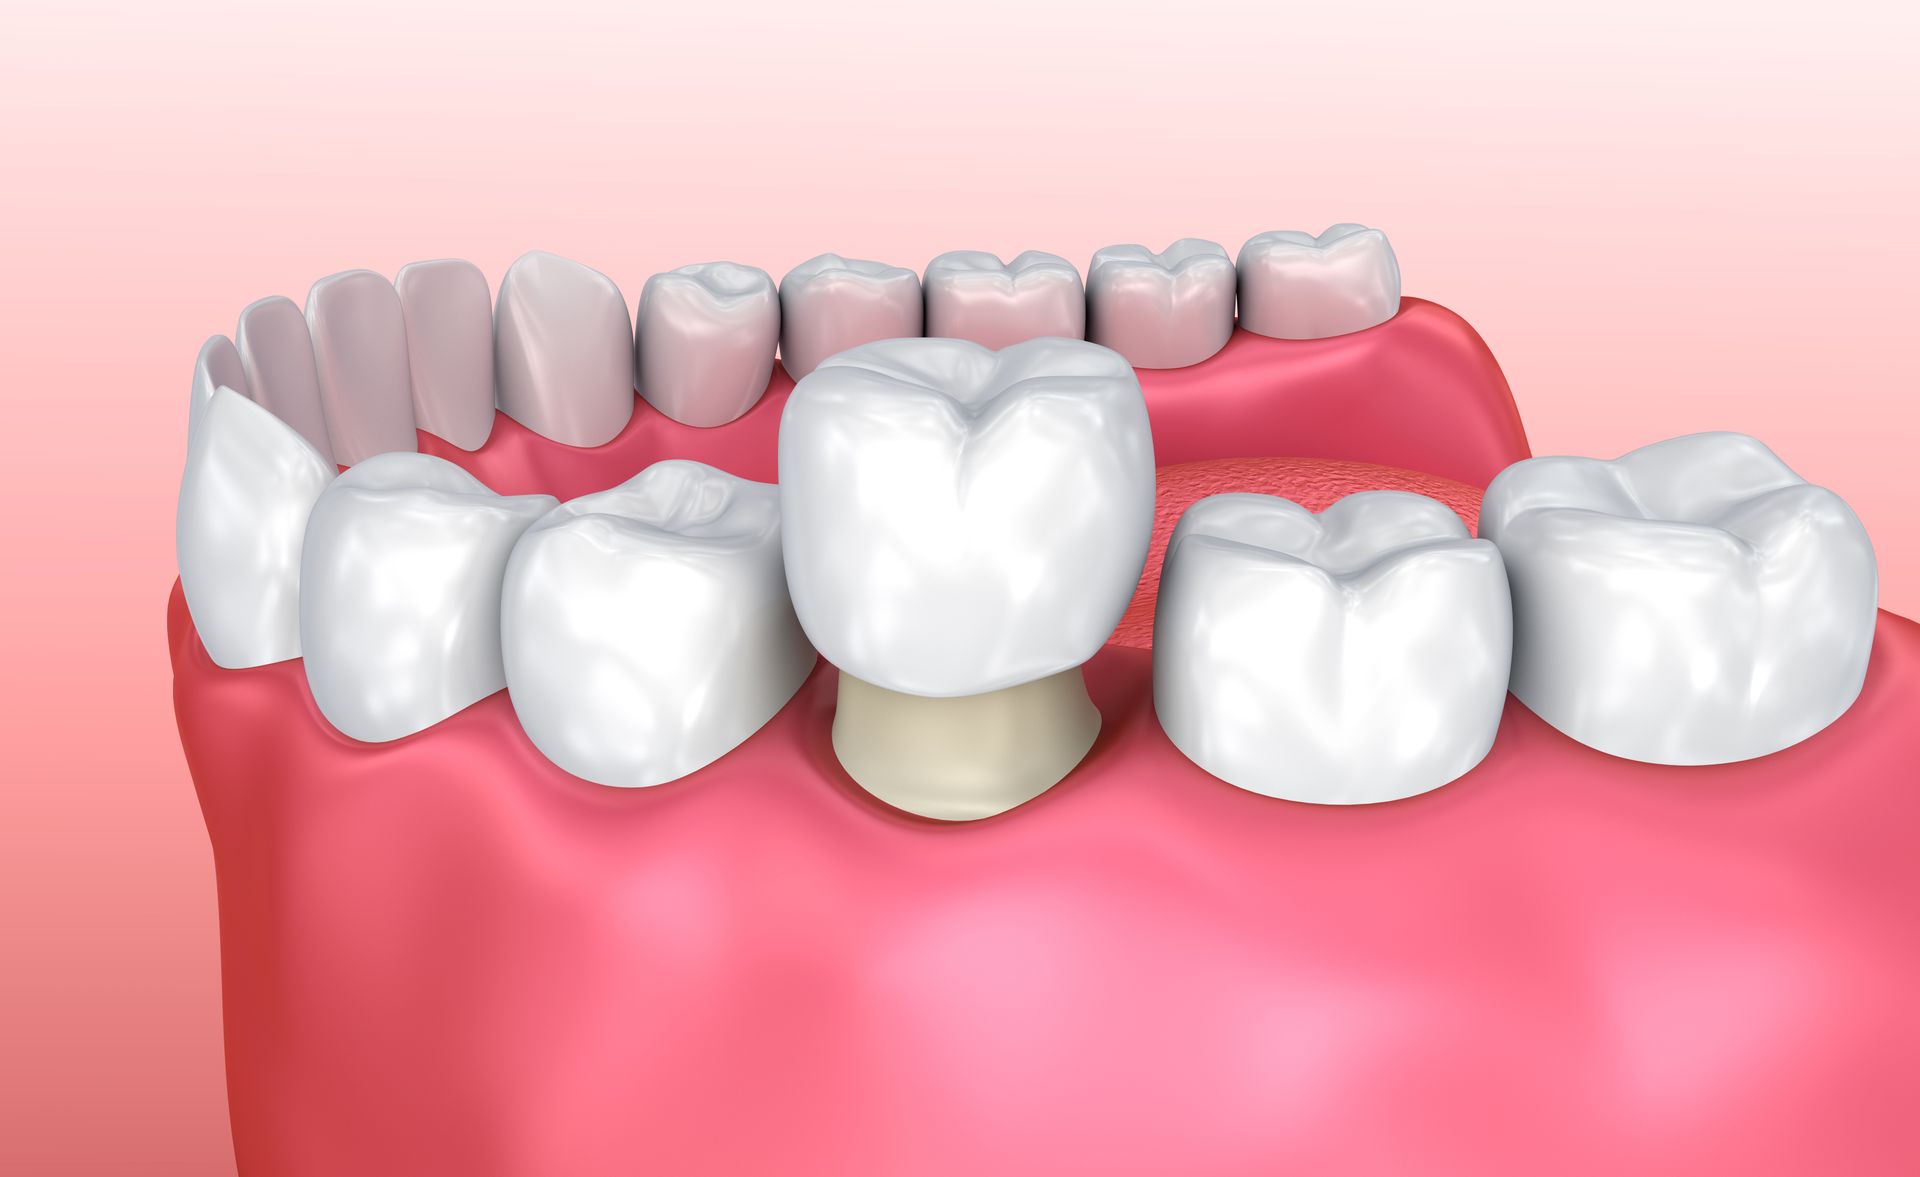 A computer generated image of a dental crown being placed on a tooth.